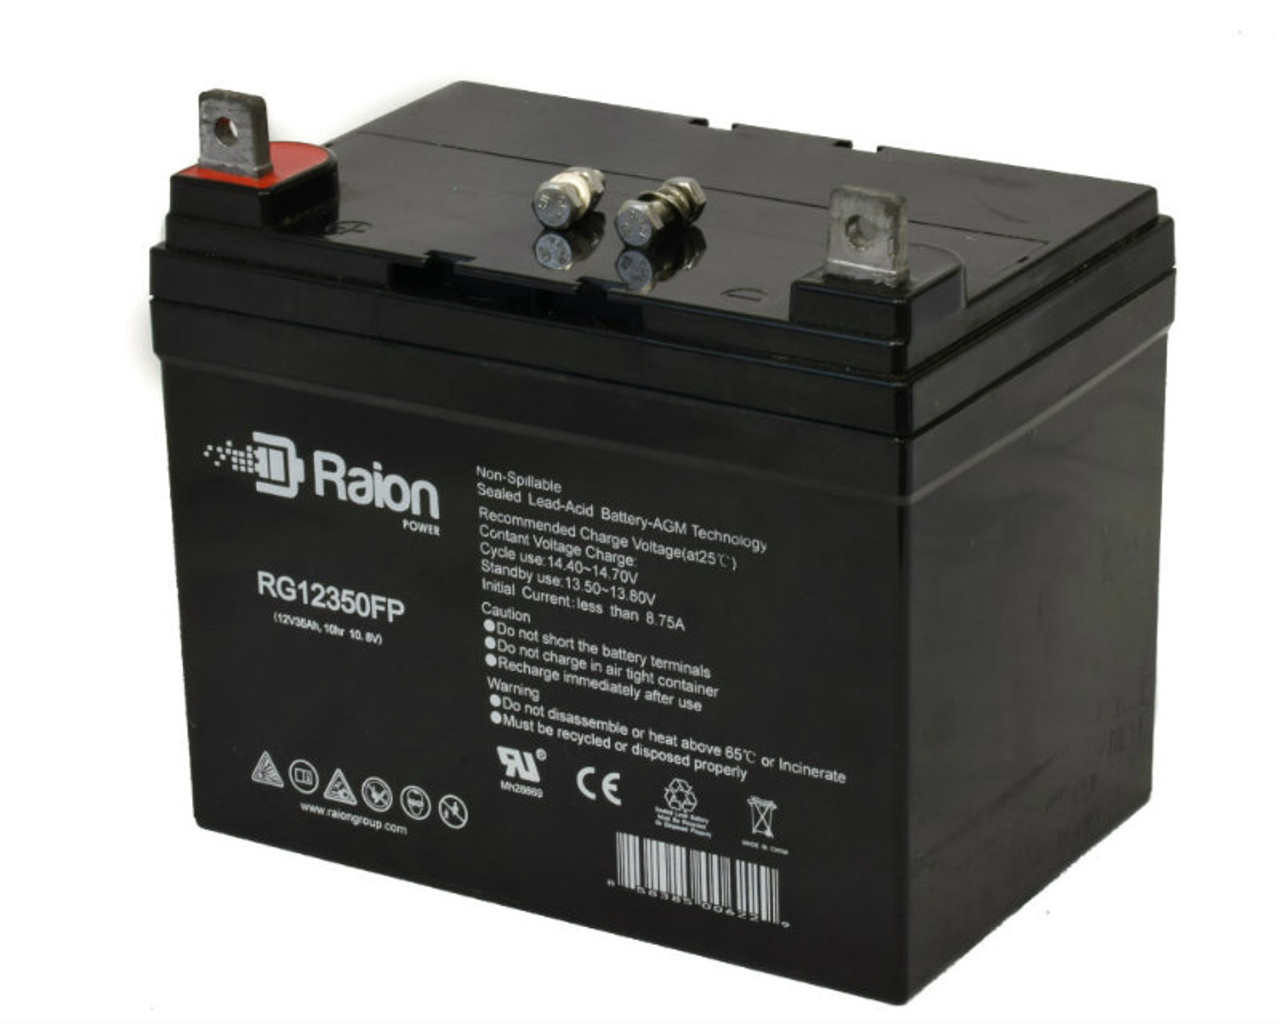 Raion Power Replacement 12V 35Ah Battery for Cub Cadet 2166 - 1 Pack